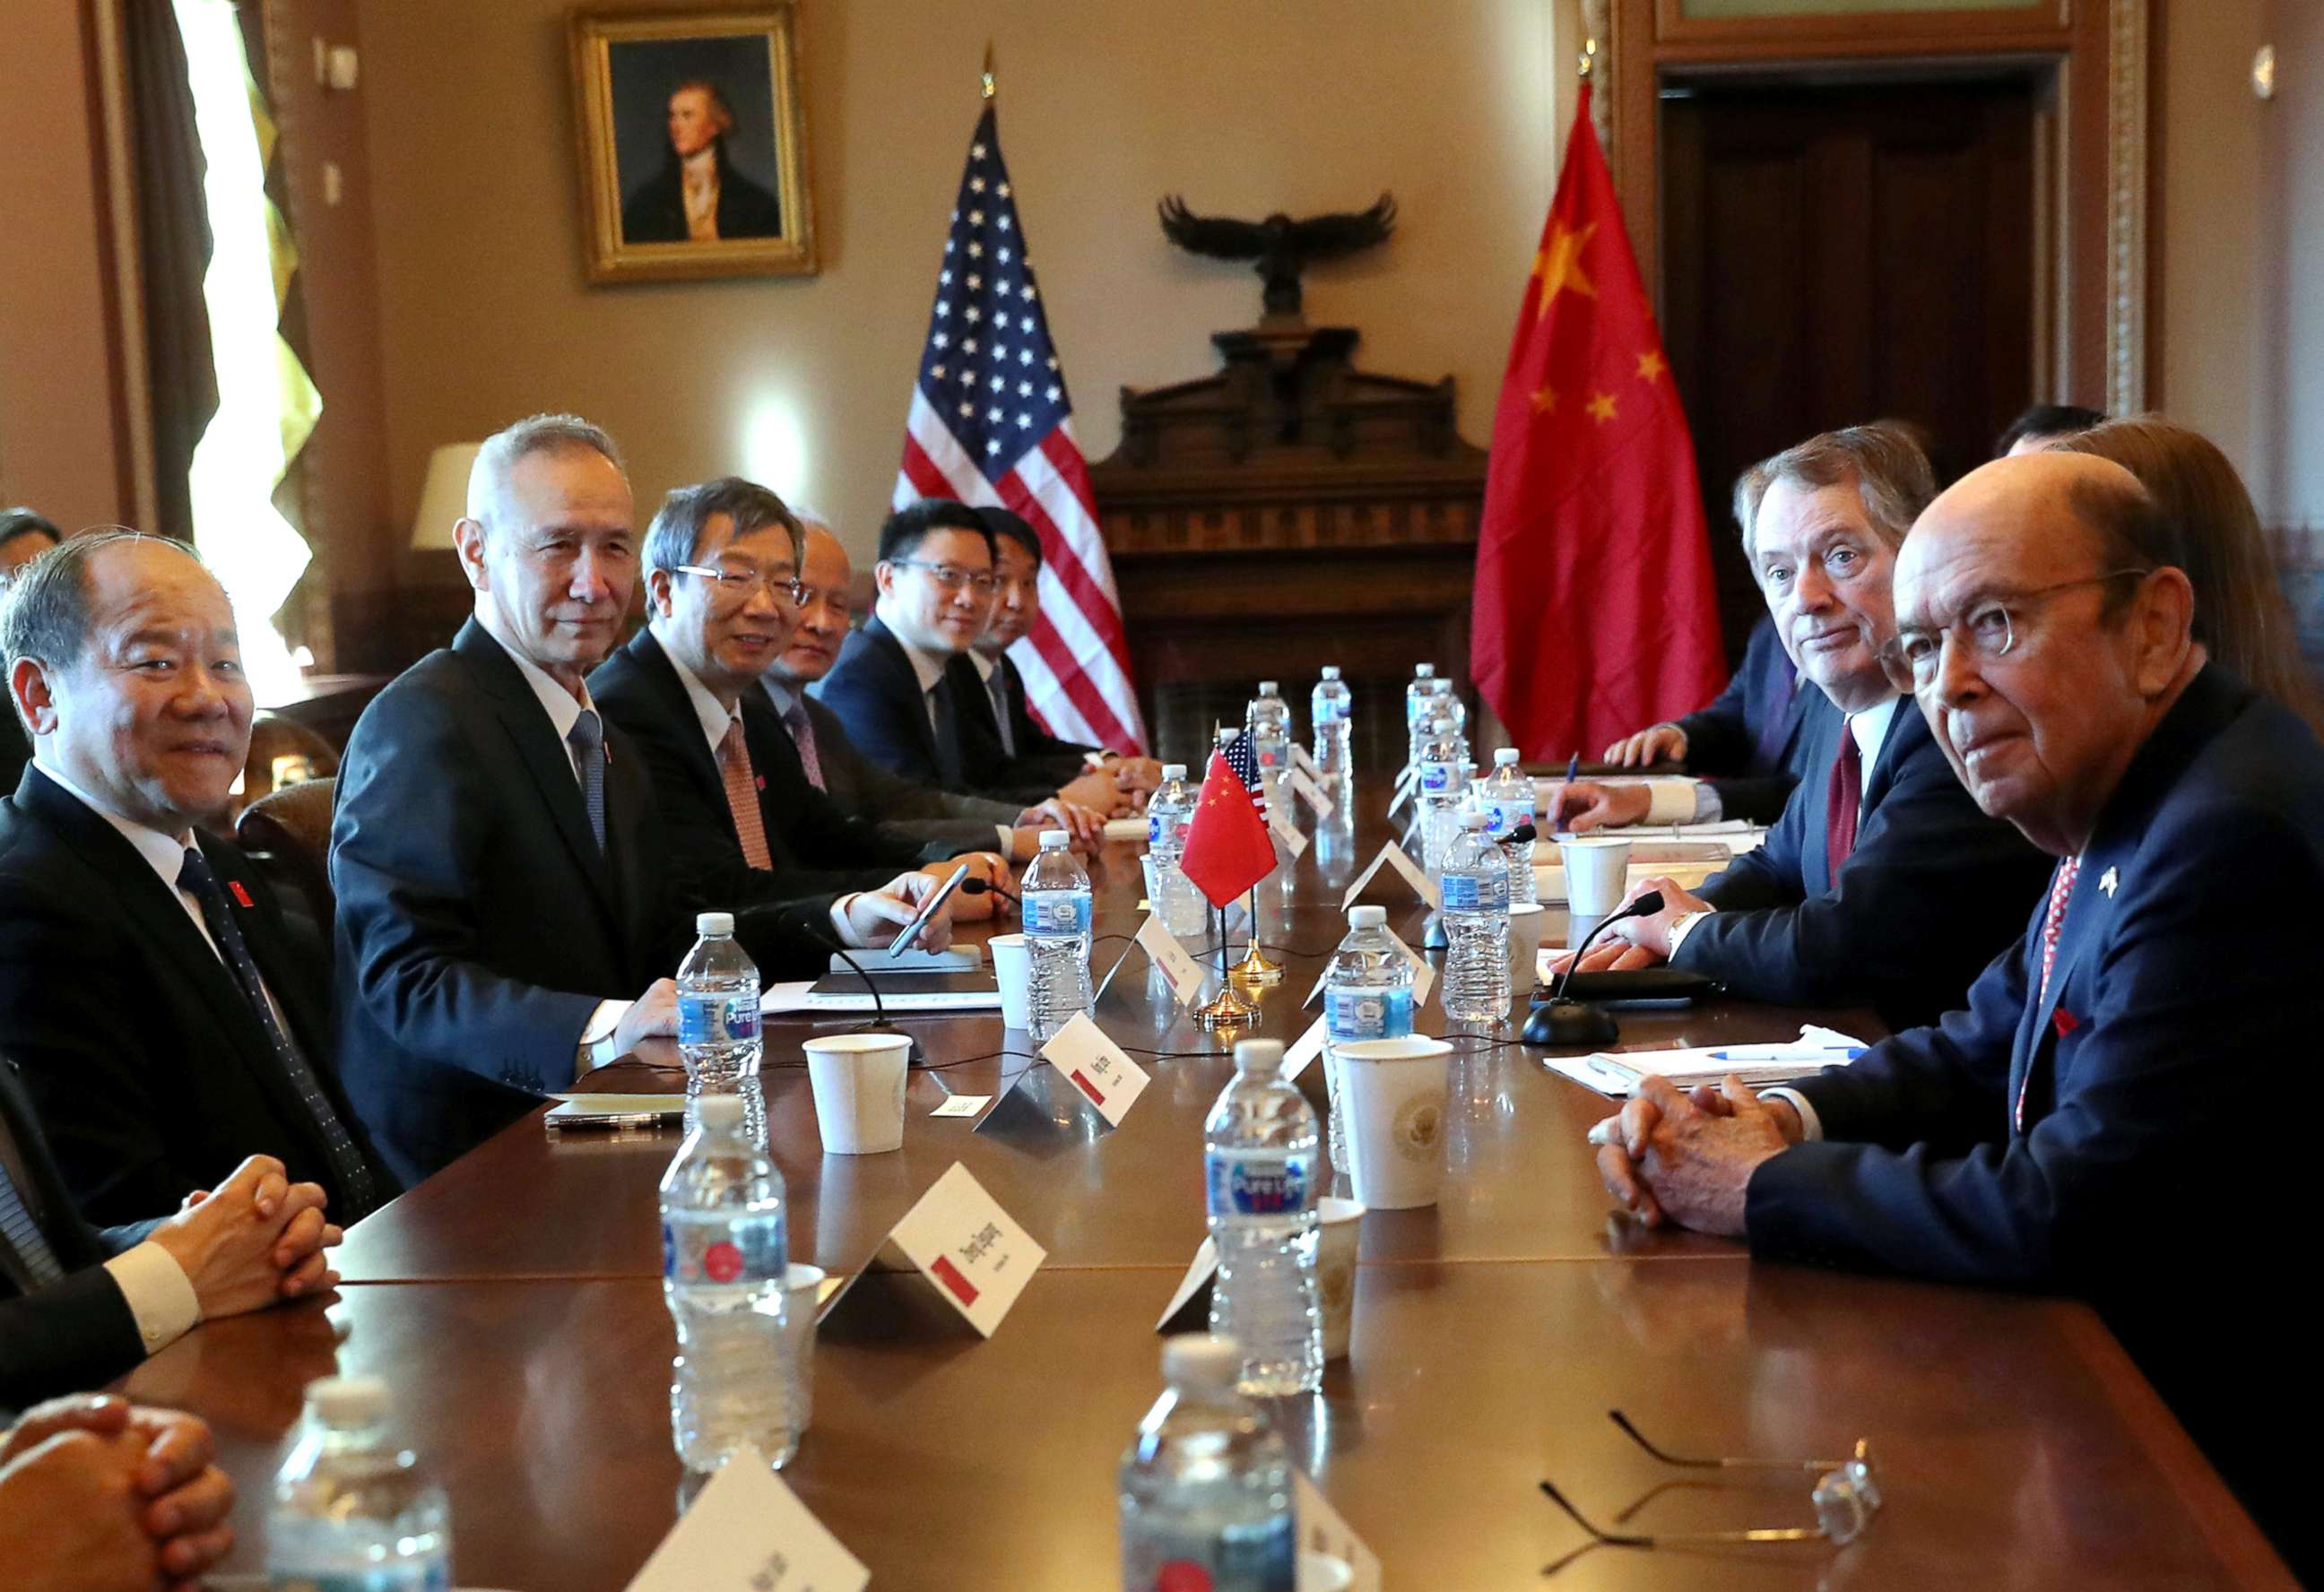 PHOTO: U.S. Trade Representative Robert Lighthizer speaks across from China's Vice Premier Liu He during the opening of U.S.-China Trade Talks in the Eisenhower Executive Office Building at the White House in Washington, Jan.30, 2019.